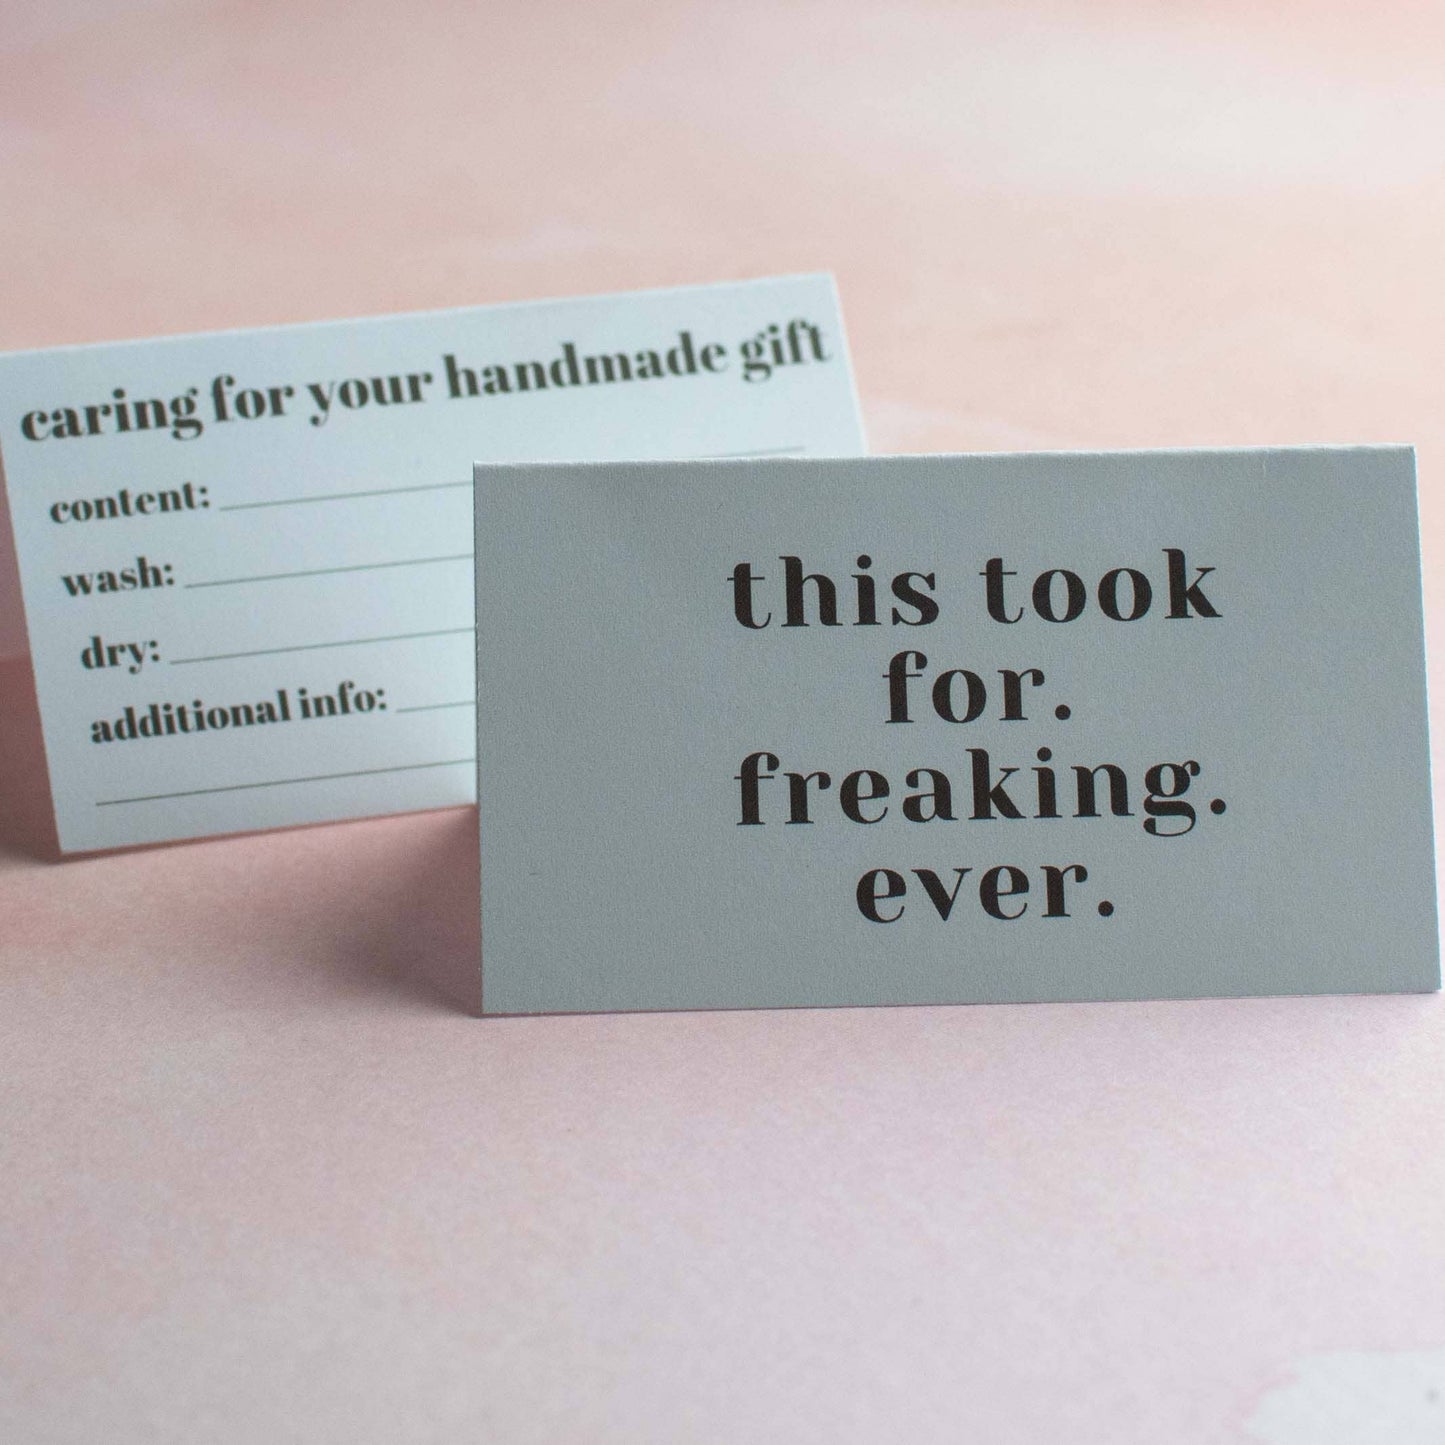 Mini "Care Instructions" Greeting Cards - "This took for freaking ever"